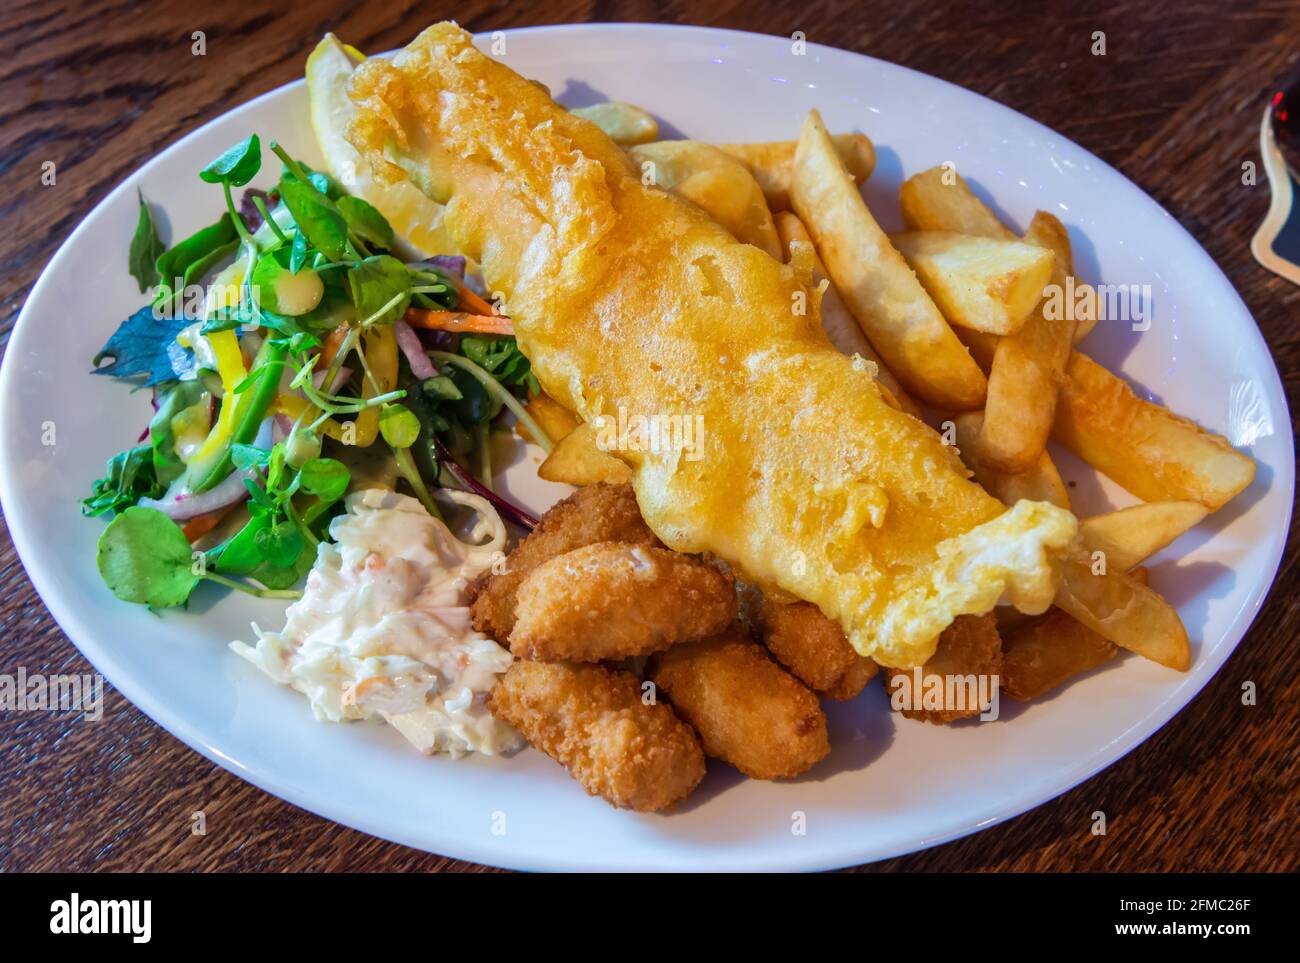 Plate of fish and chips in Scotland. Stock Photo